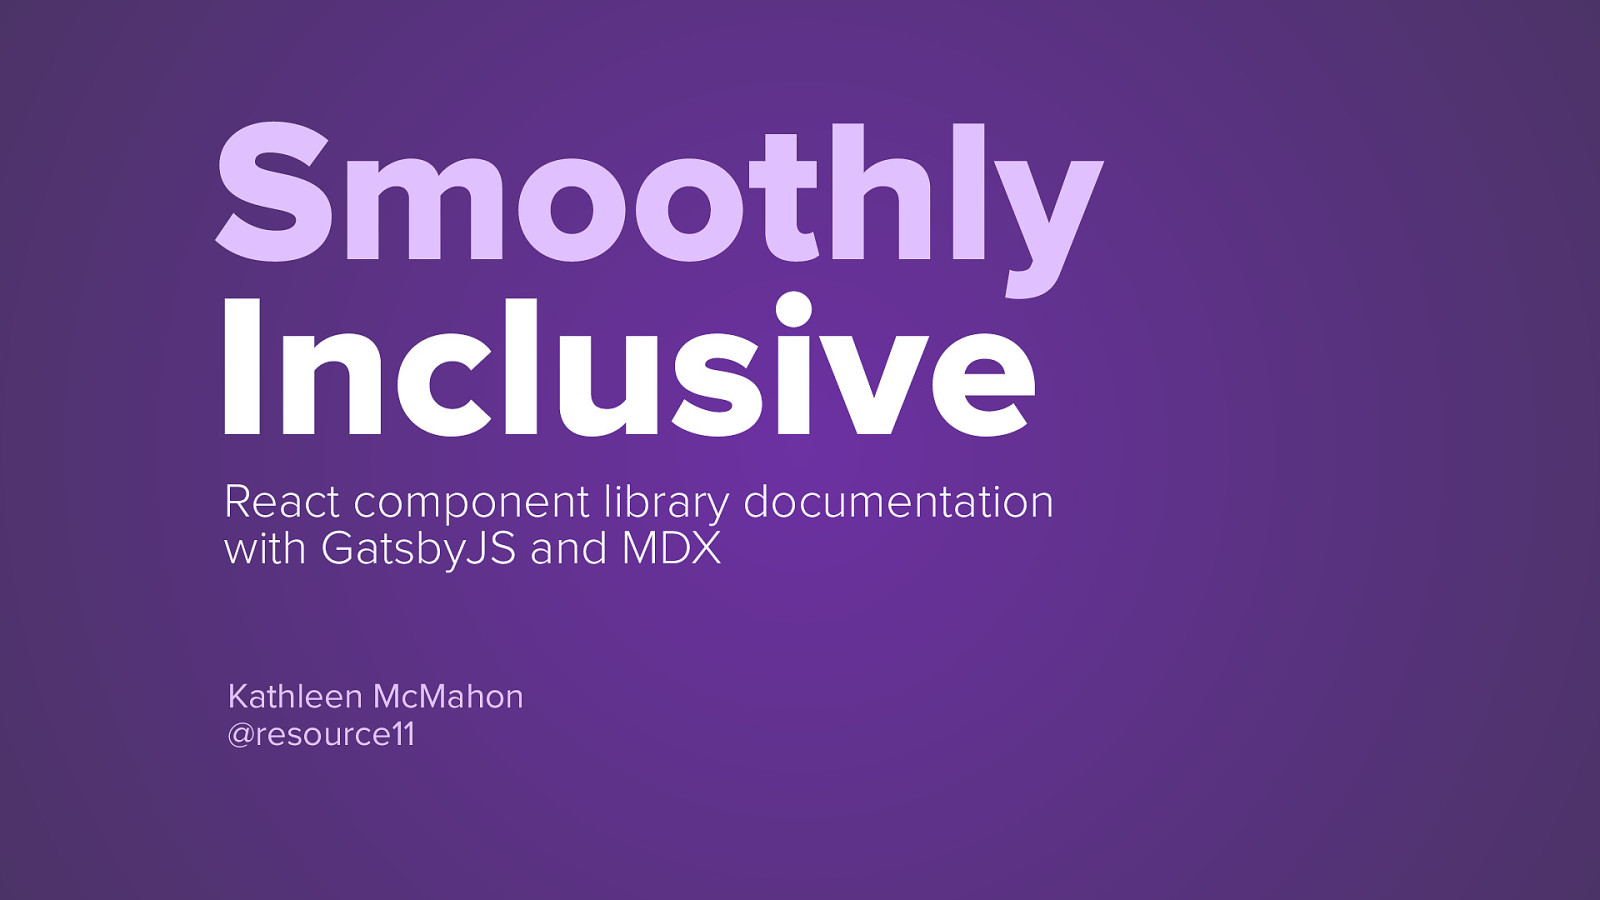 Smoothly Inclusive: React component library documentation with Gatsby and MDX